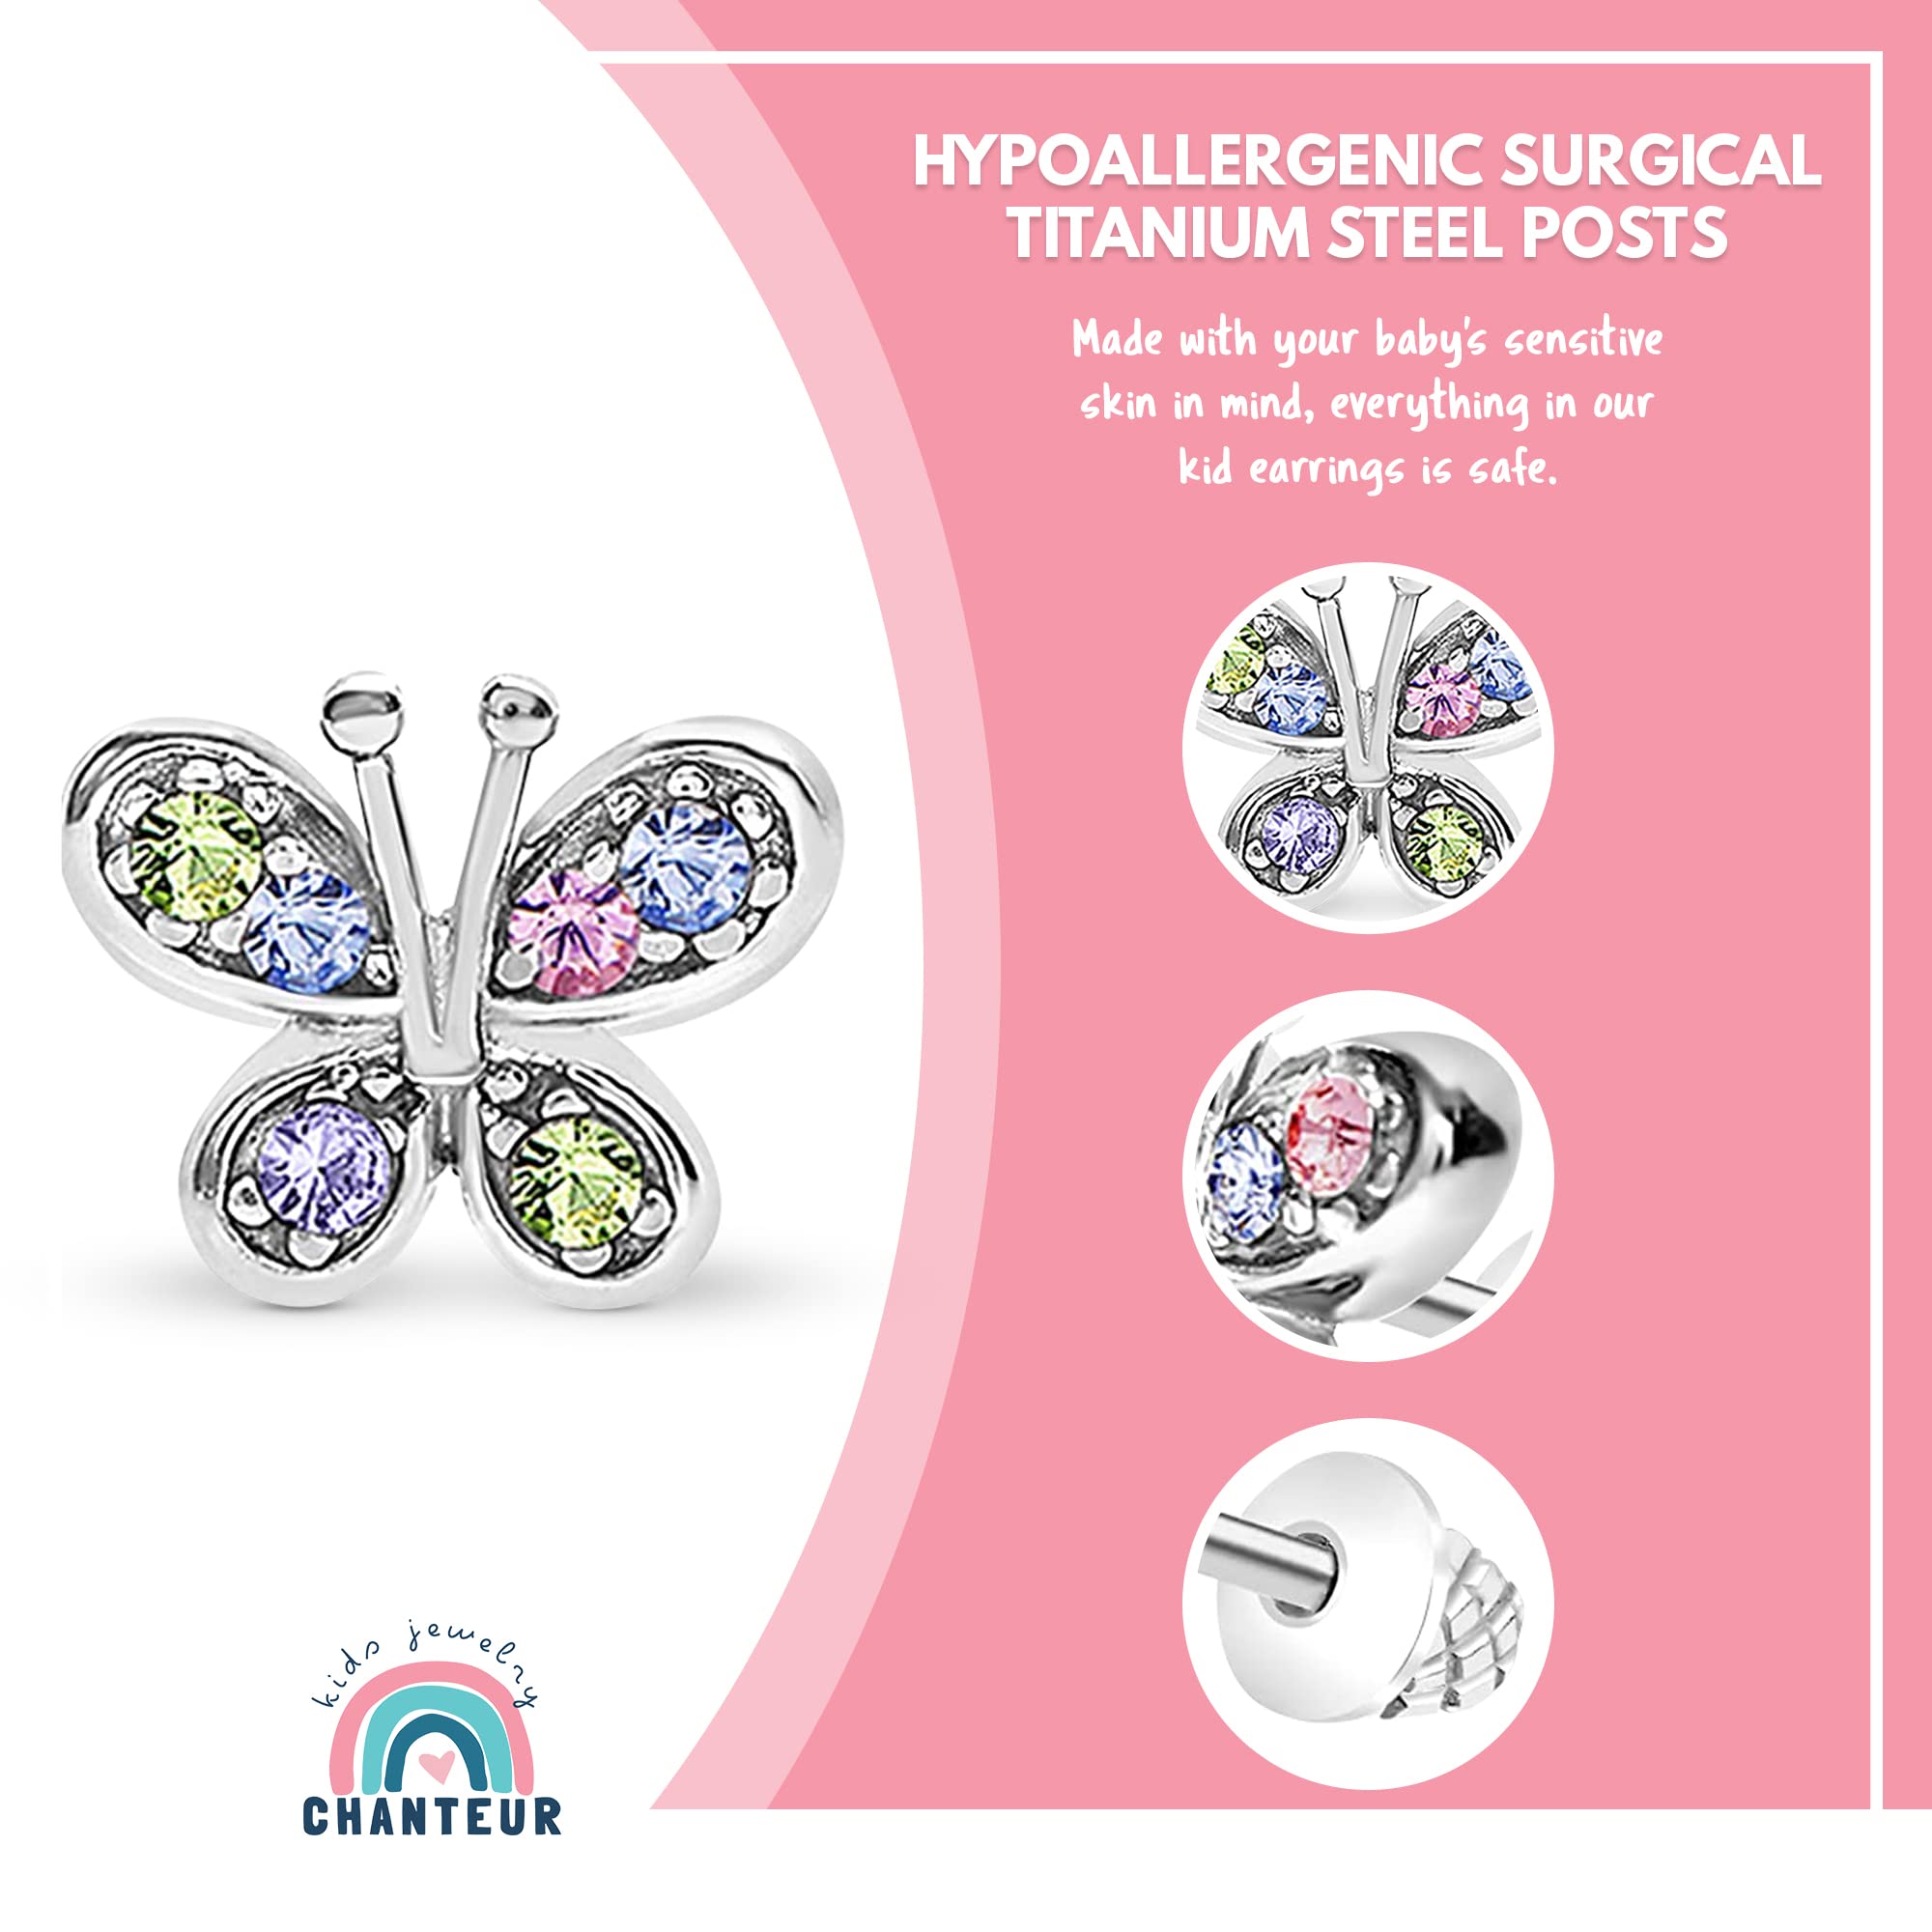 Kids Hypoallergenic Earrings, Butterfly Earrings for Girls, White Gold Toned Baby Earrings, Jewelry for Kids, Earring Set with Colorful Crystals, Available in Screwback & Hoop Leverback Jewelry